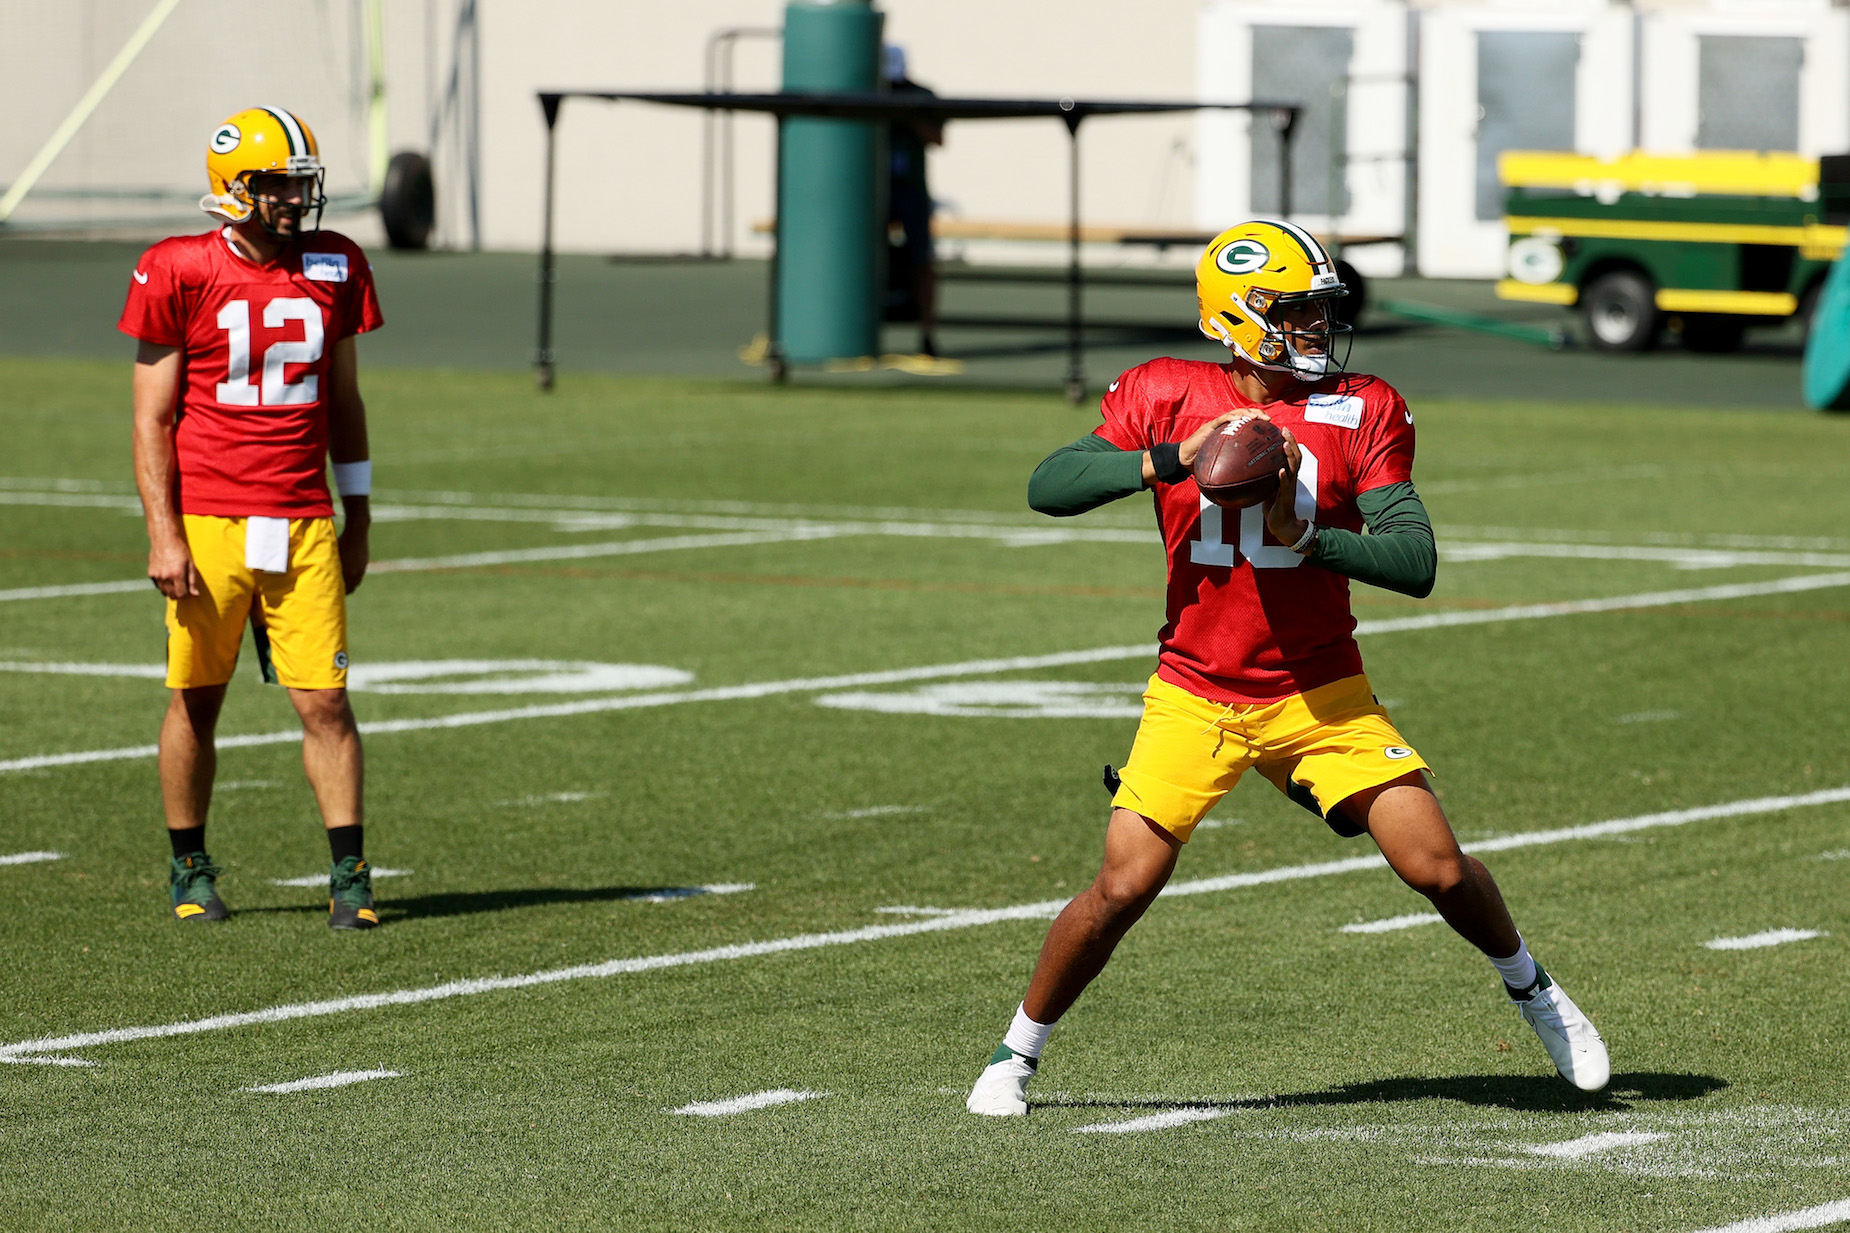 Forgot replacing Aaron Rodgers, Jordan Love might not even be the Green Bay Packers backup quarterback this season.